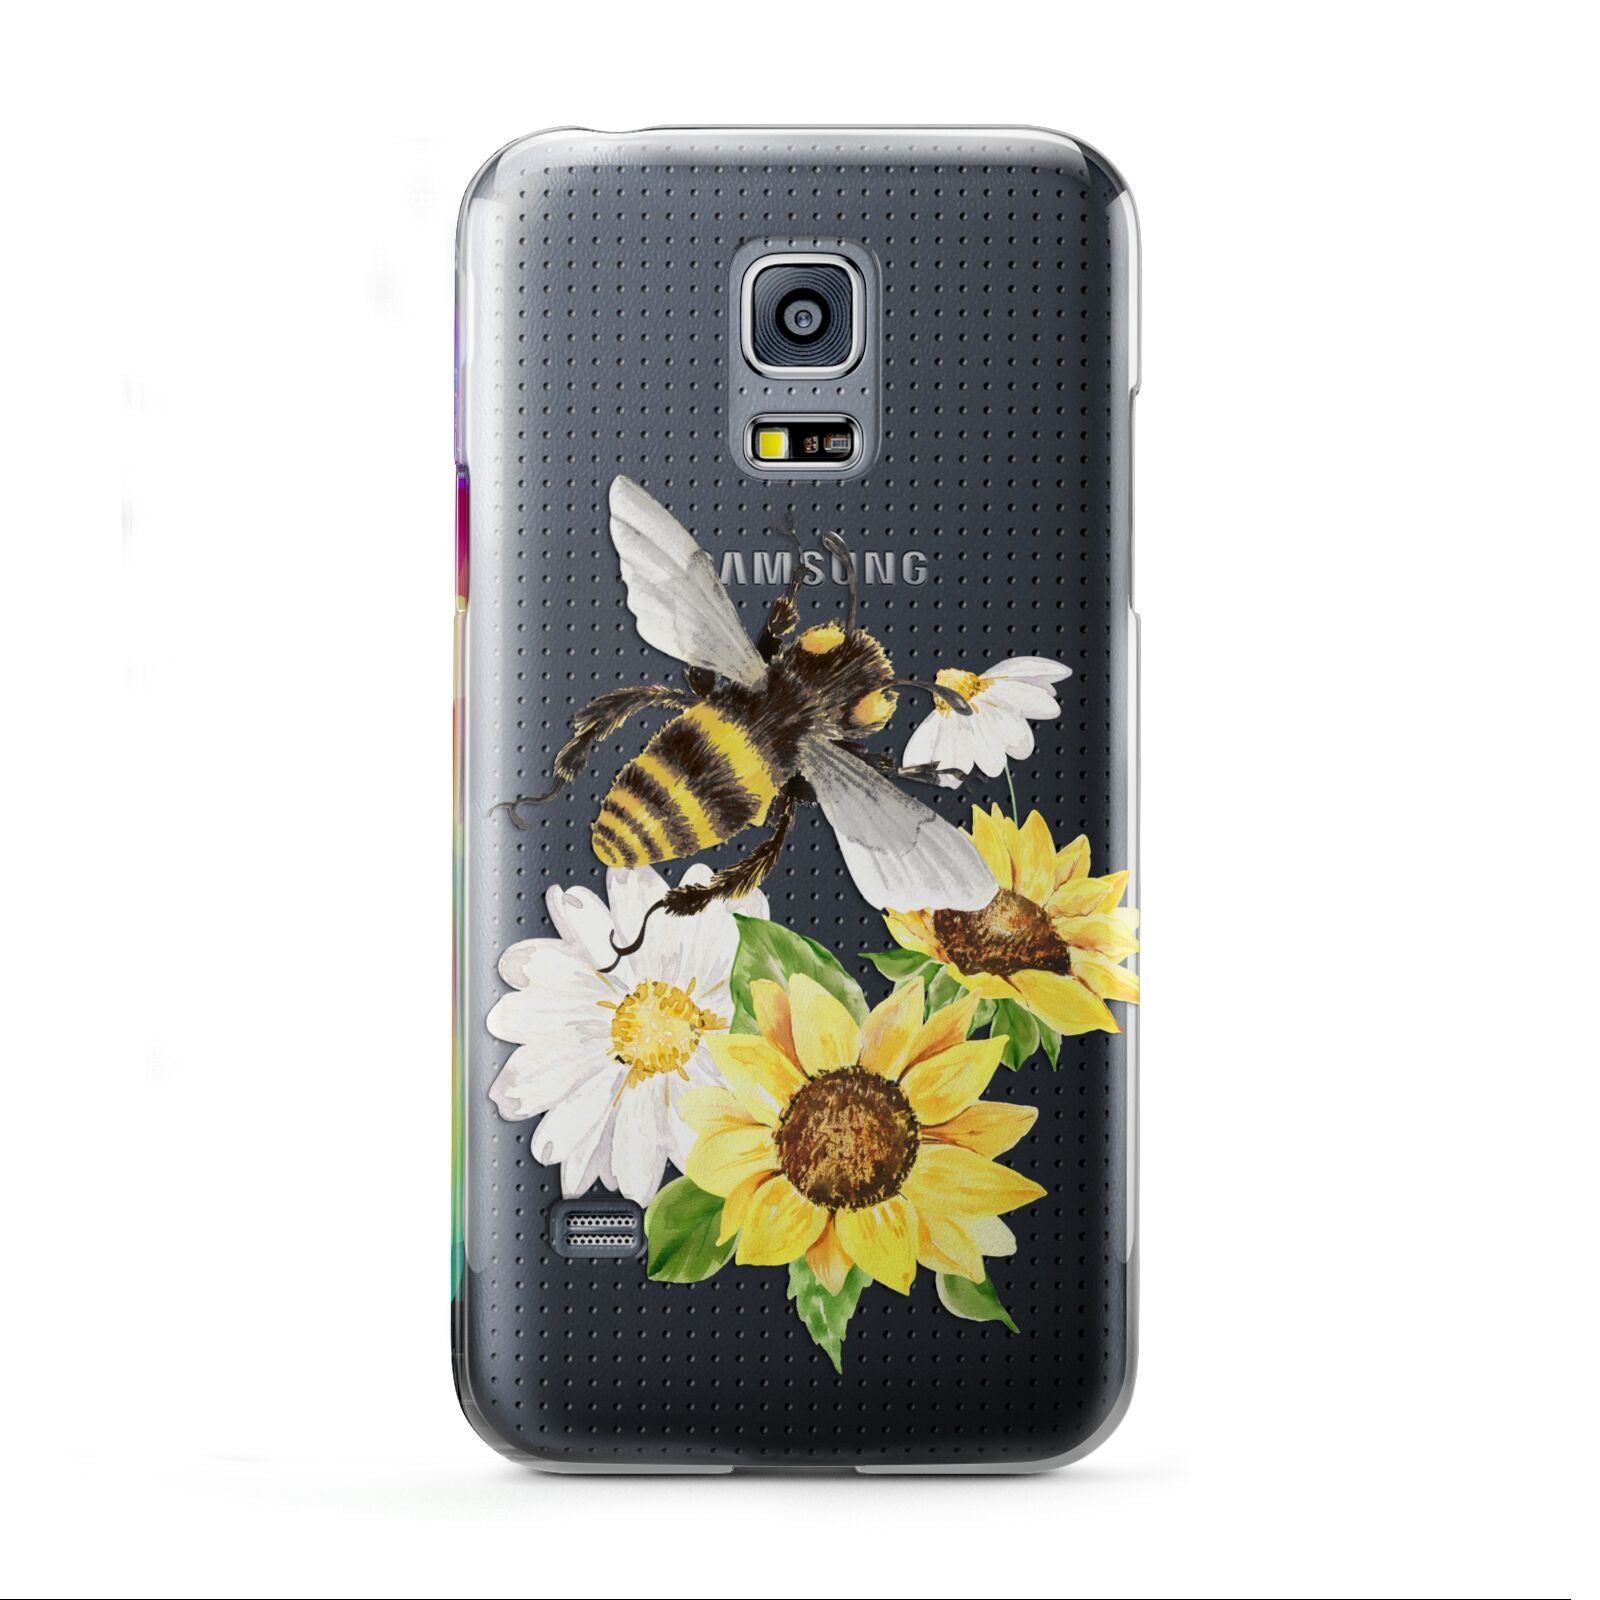 Watercolour Bee and Sunflowers Samsung Galaxy S5 Mini Case